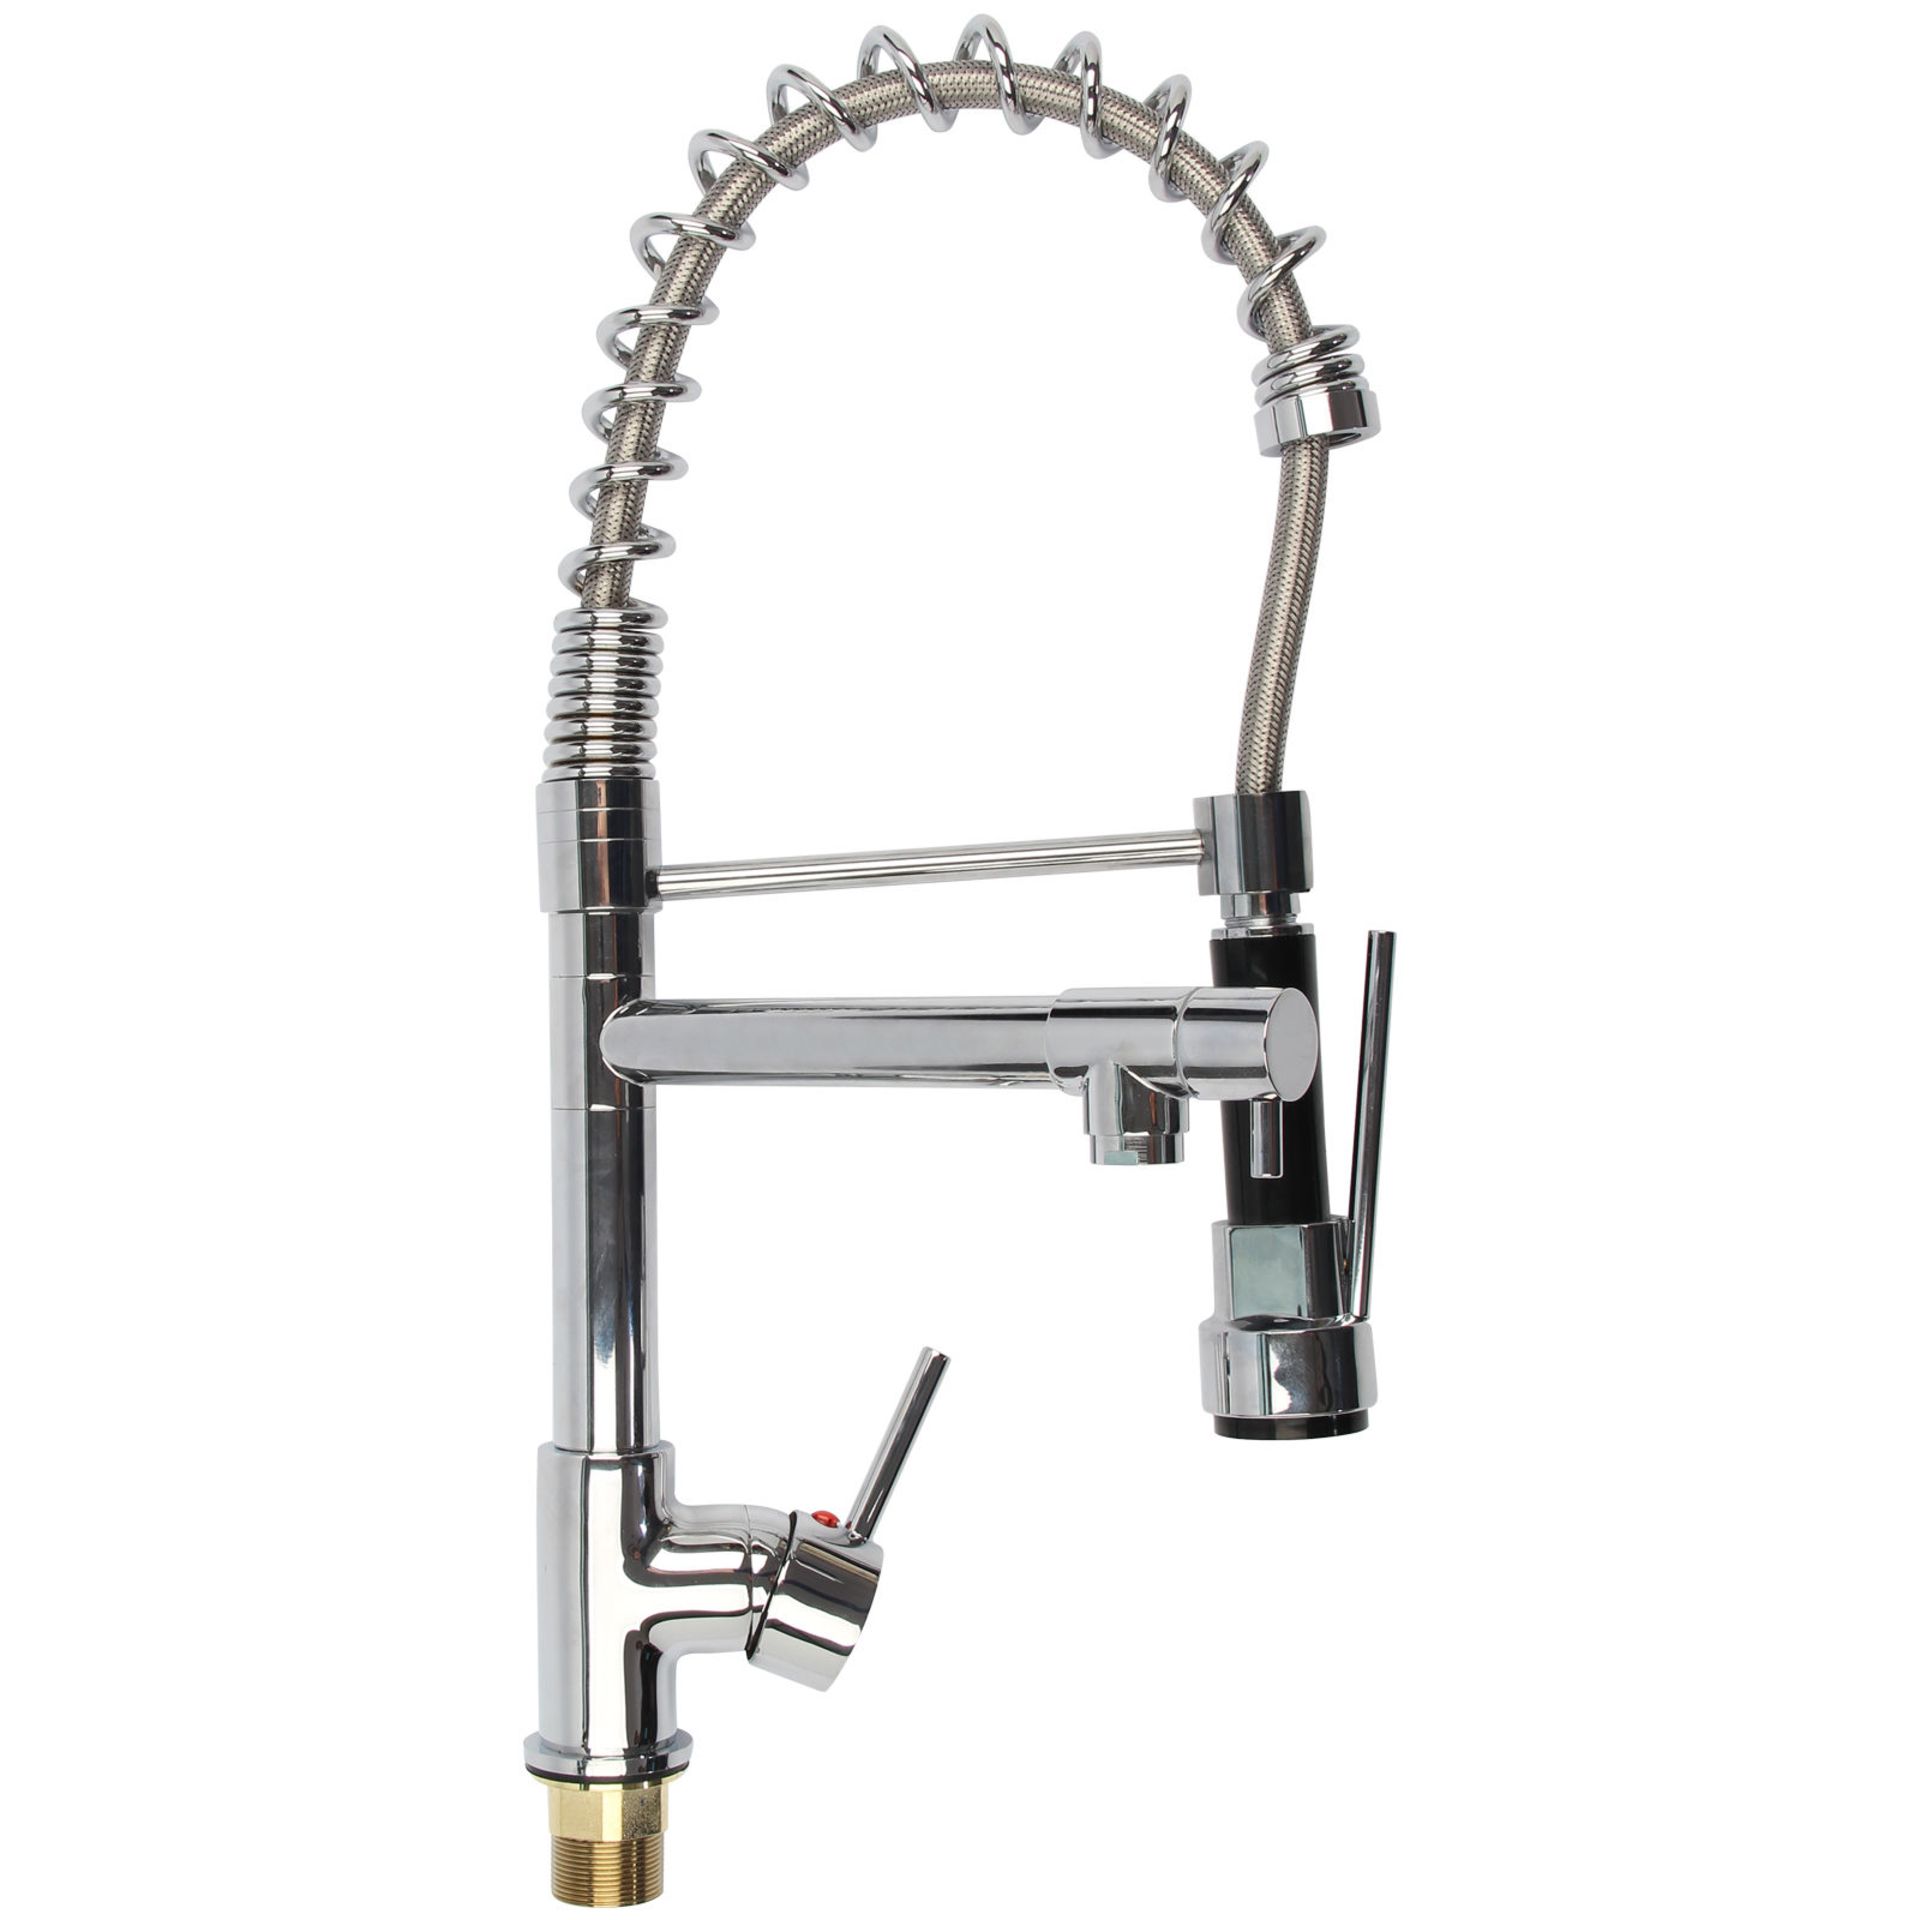 (A33) Bentley Modern Monobloc Chrome Brass Pull Out Spray Mixer Tap. RRP £349.99. This tap is from - Image 4 of 6